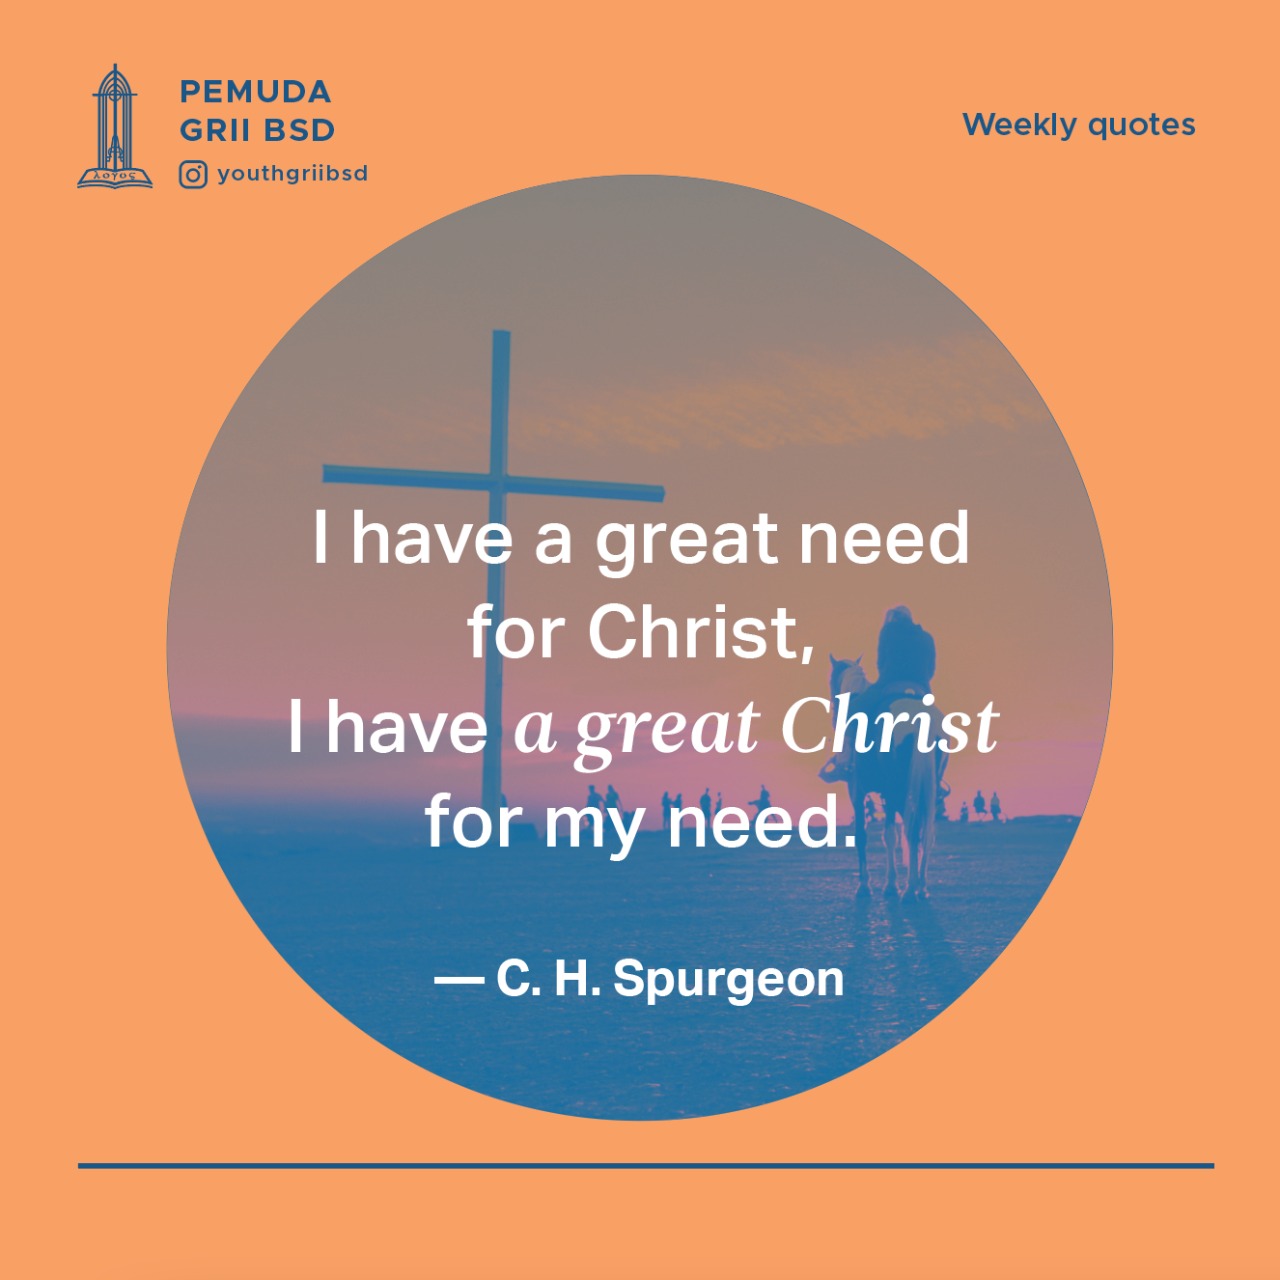 I have a great need for Christ, I have a great Christ for my need.